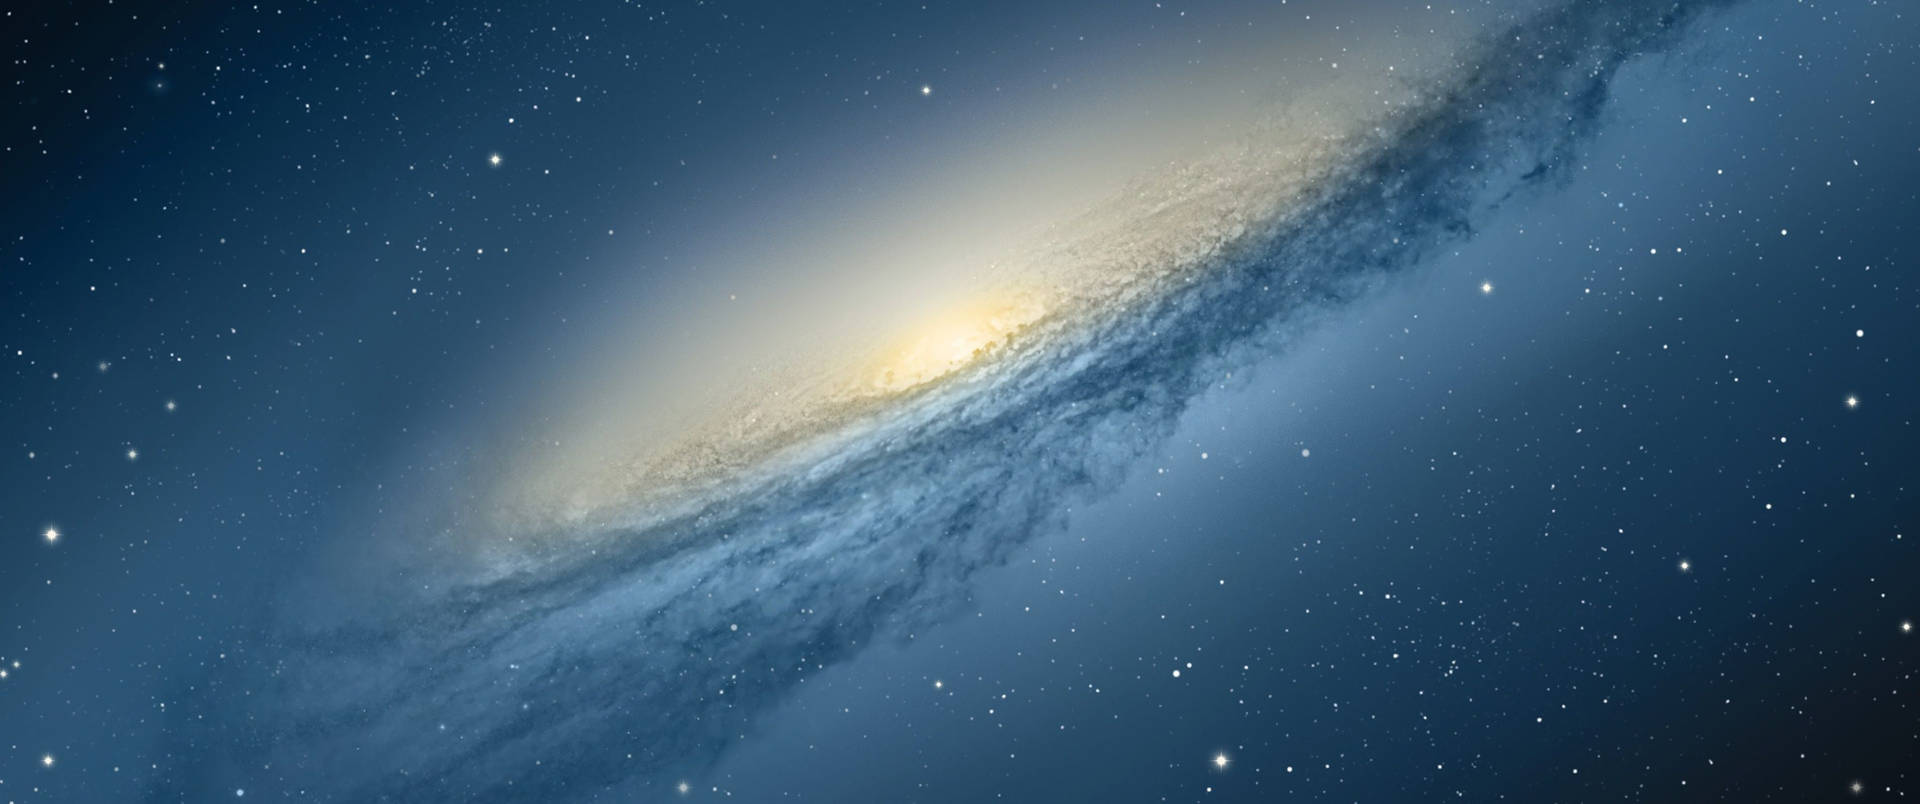 Cottony soft white and blue galaxy wallpaper.